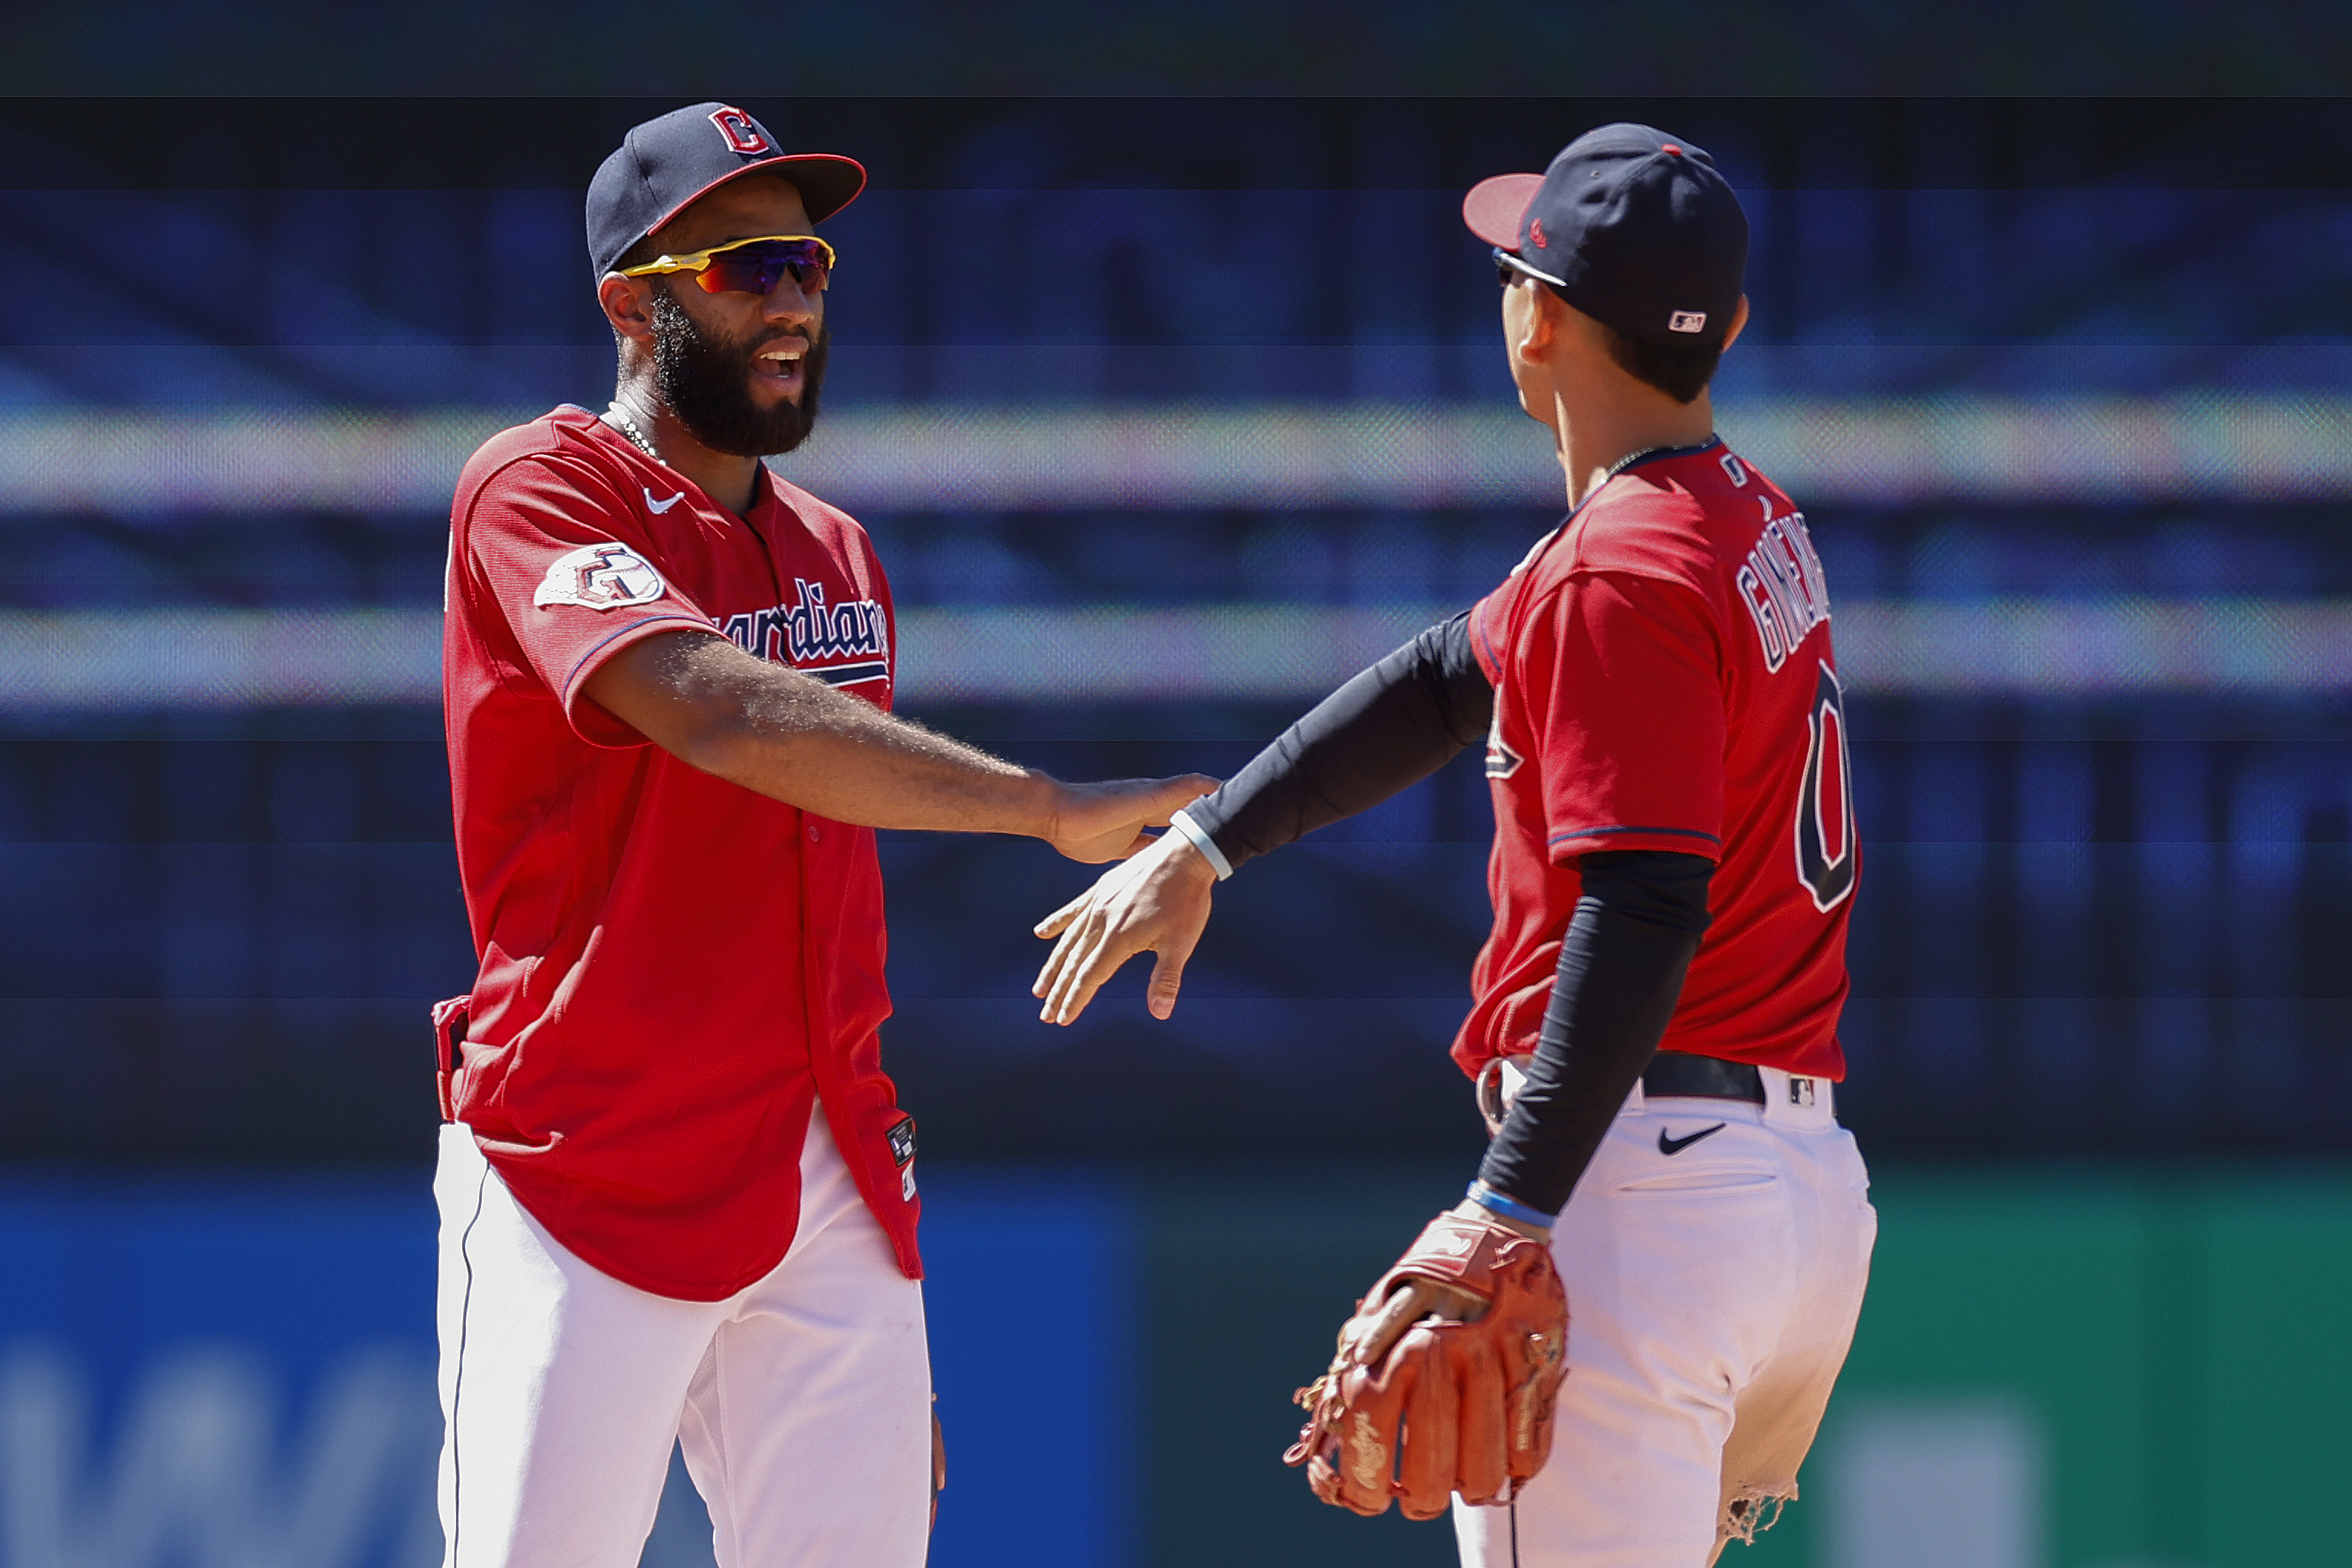 As Guardians and Mets meet, Francisco Lindor and others reflect on